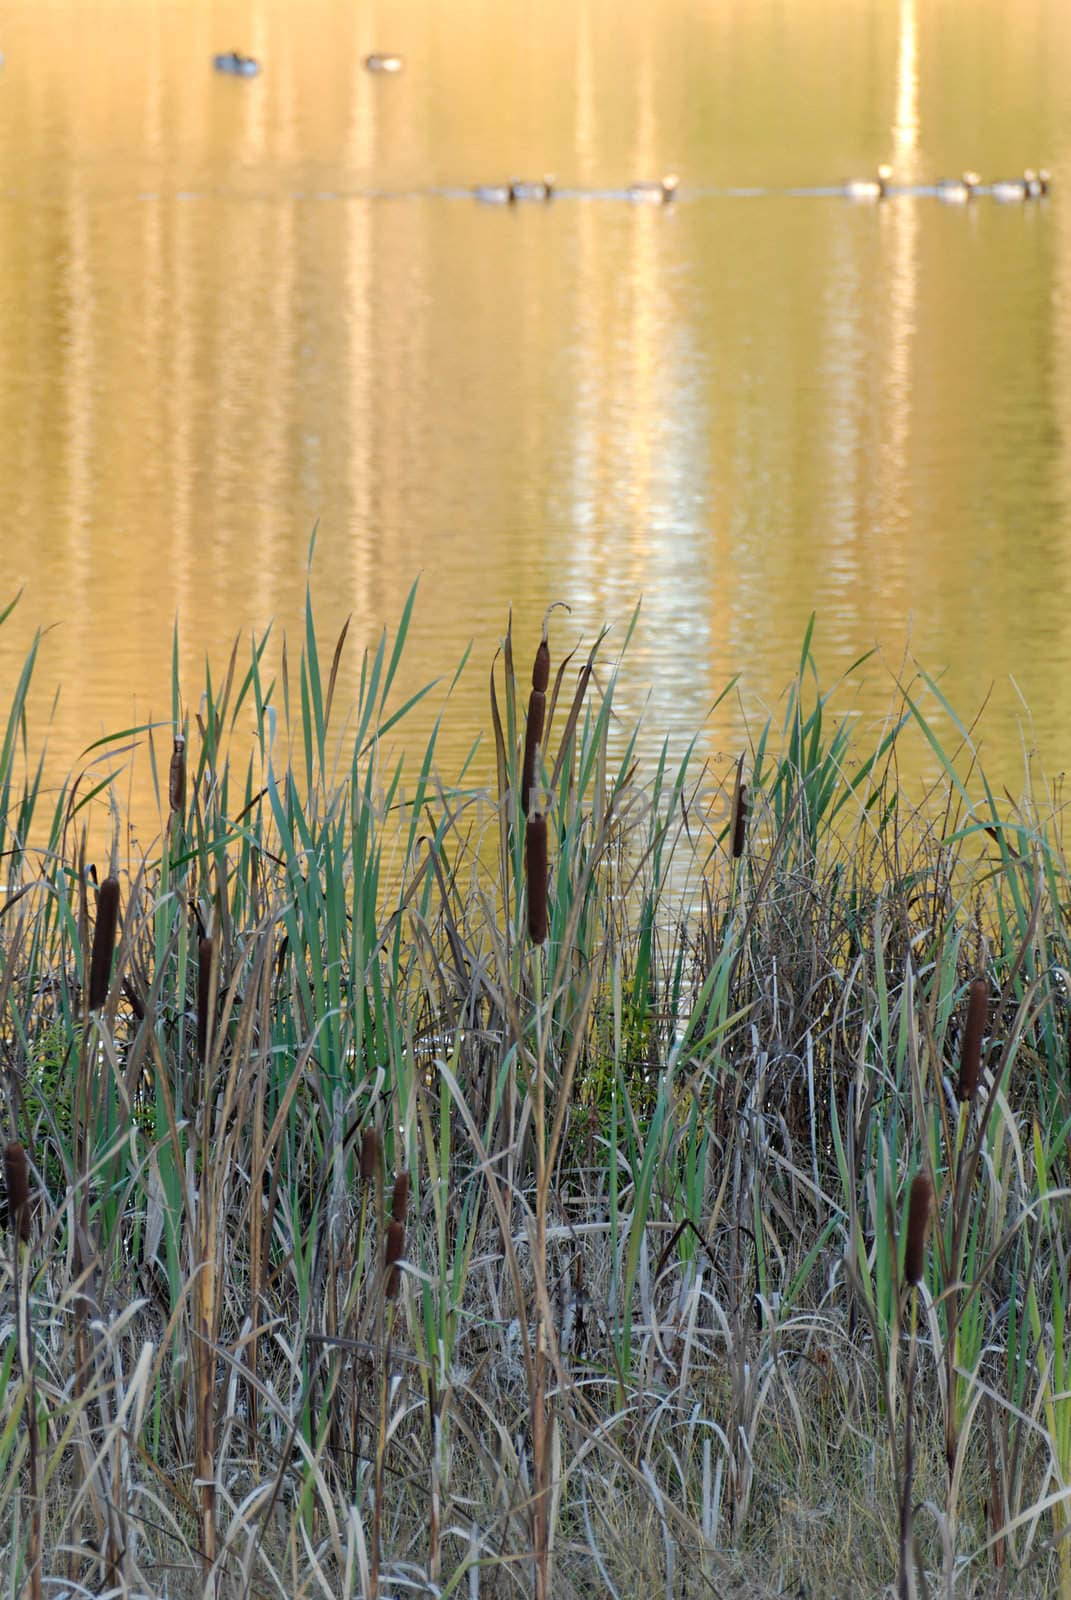 Lake surface, reflecting golden autumn foliage, and reeds in the foreground
